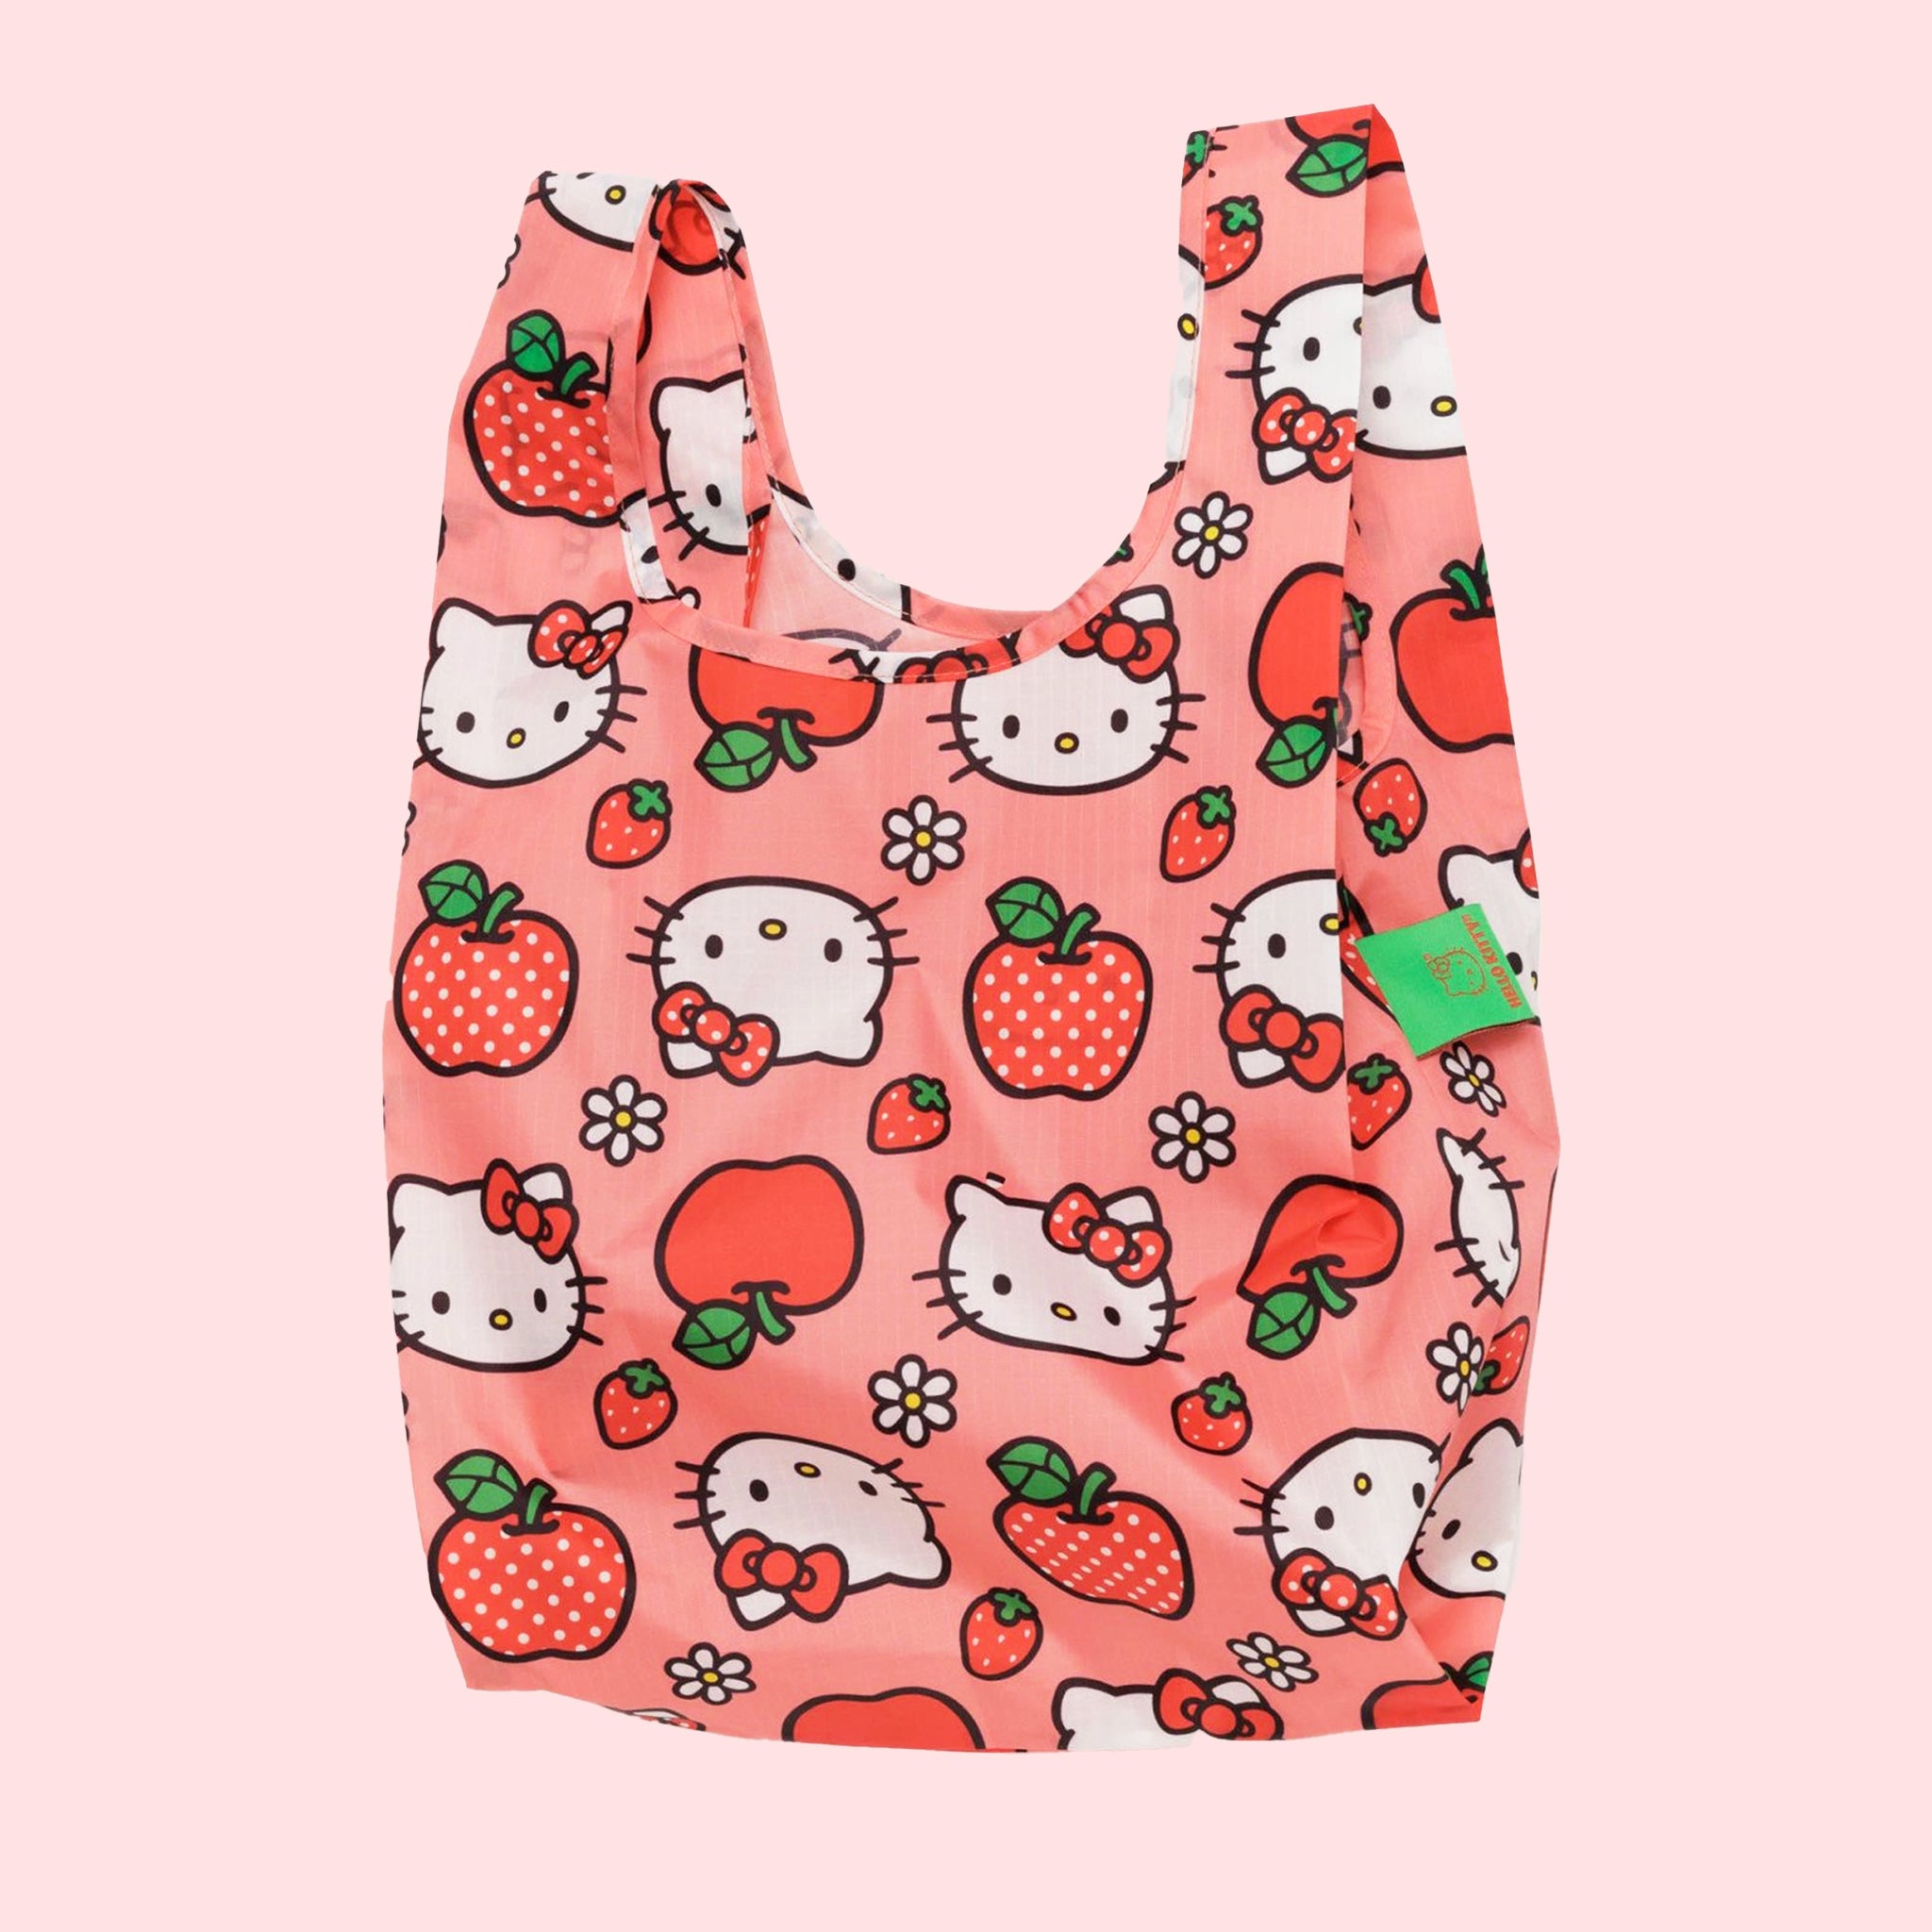 On a white background is a pink nylon bag with hello kitty and apple designs all over.